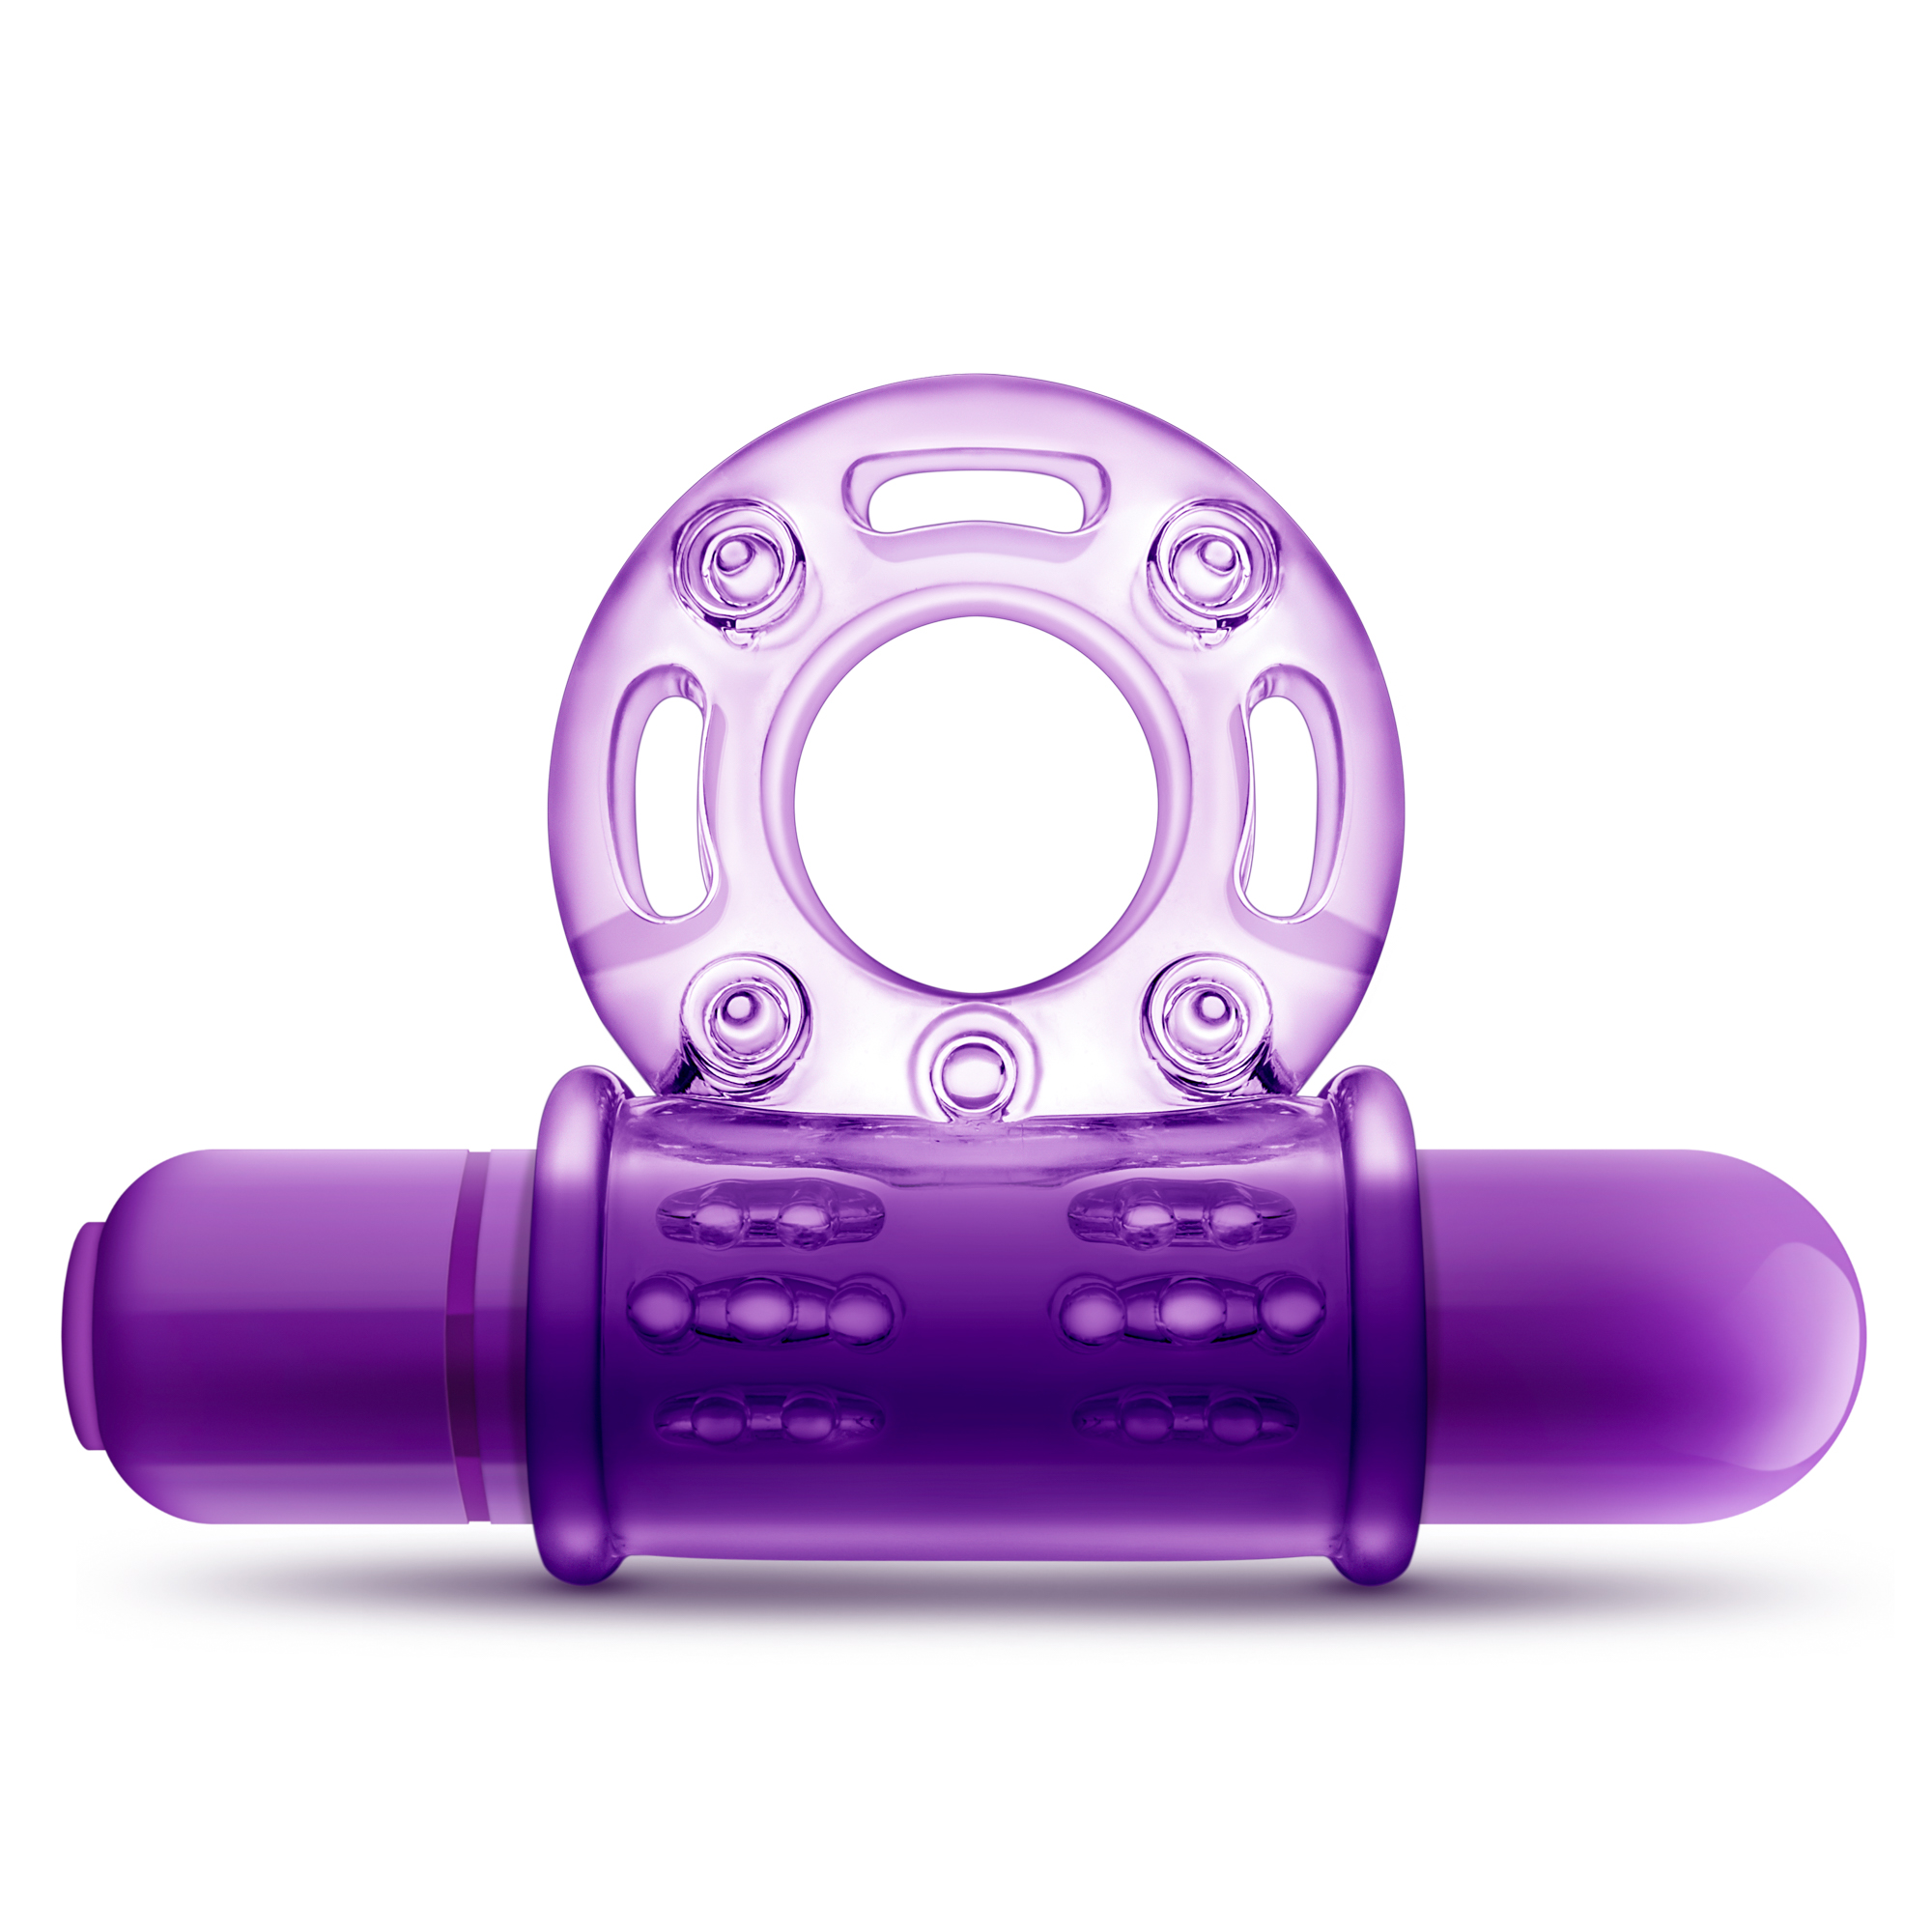 Bl 77901 Play With Me Couples Play Vibrating Cock Ring Purple Honey S Place